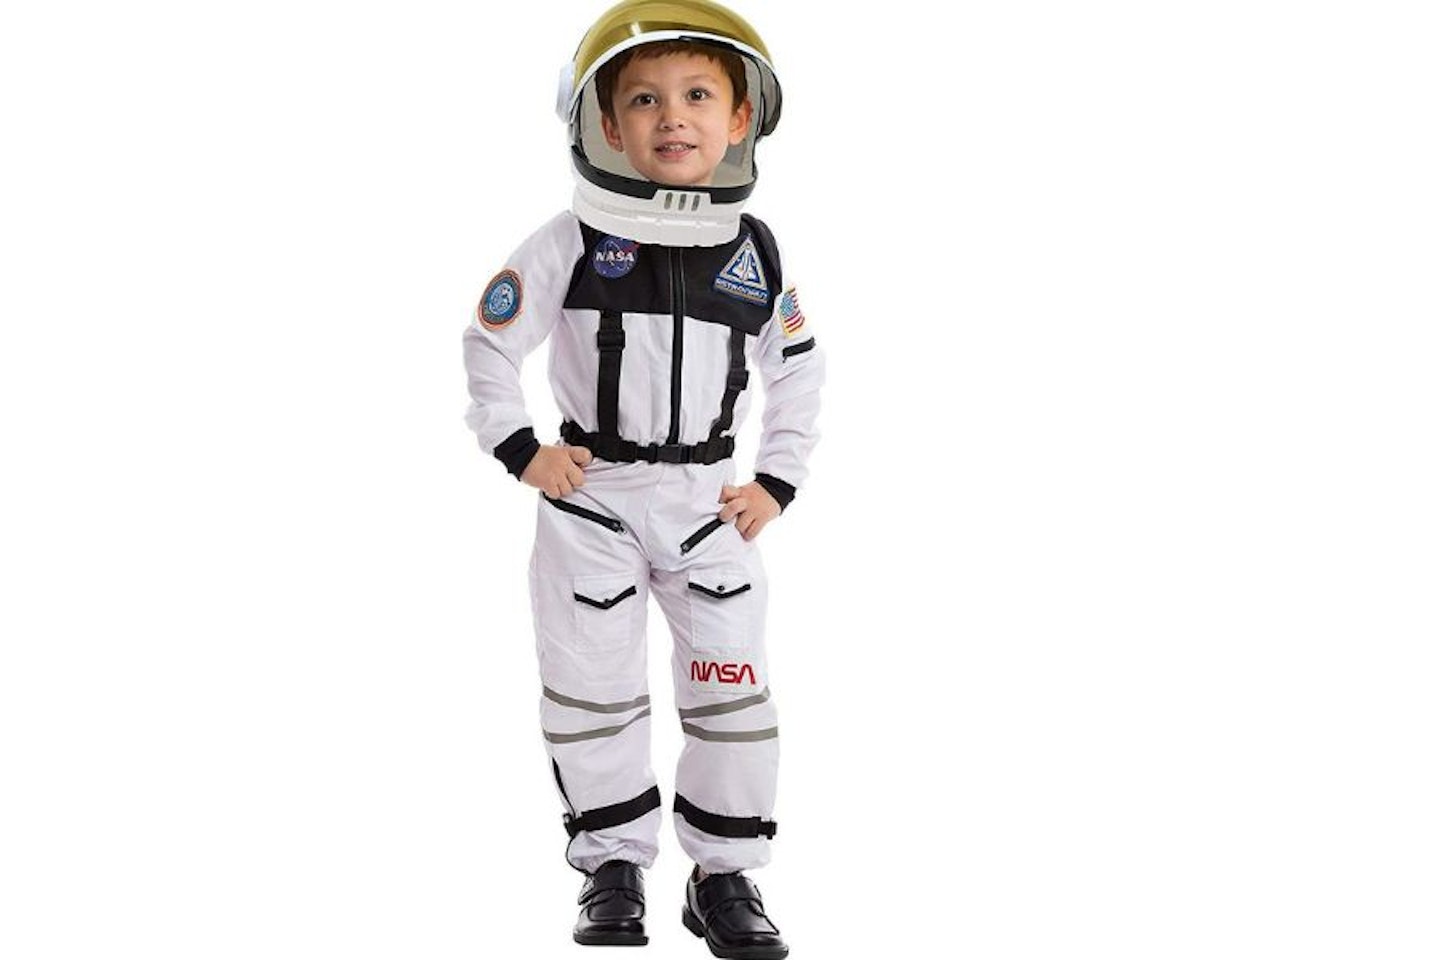 Space party ideas - Spooktacular Creations Astronaut NASA Pilot Costume with Movable Visor Helmet